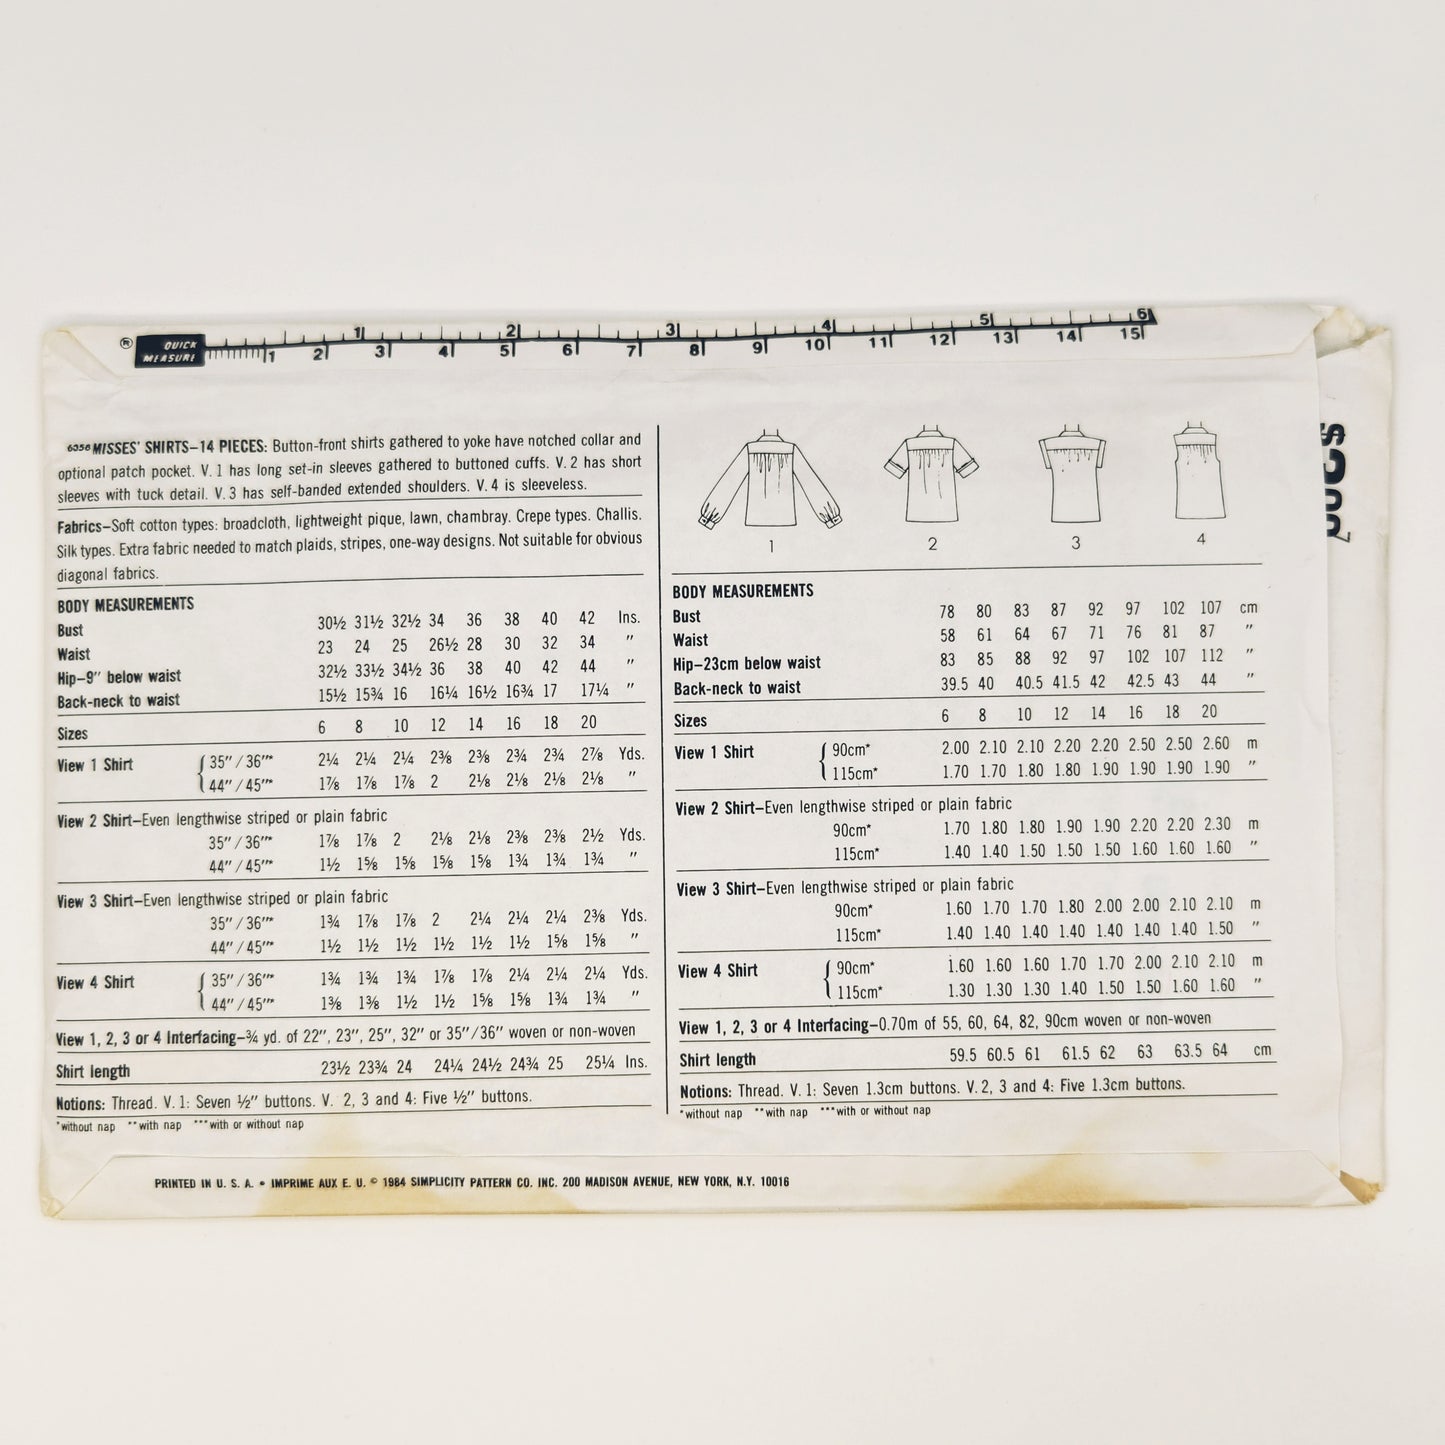 1984 Simplicity Pattern 6358 Misses Shirts Size 6-8